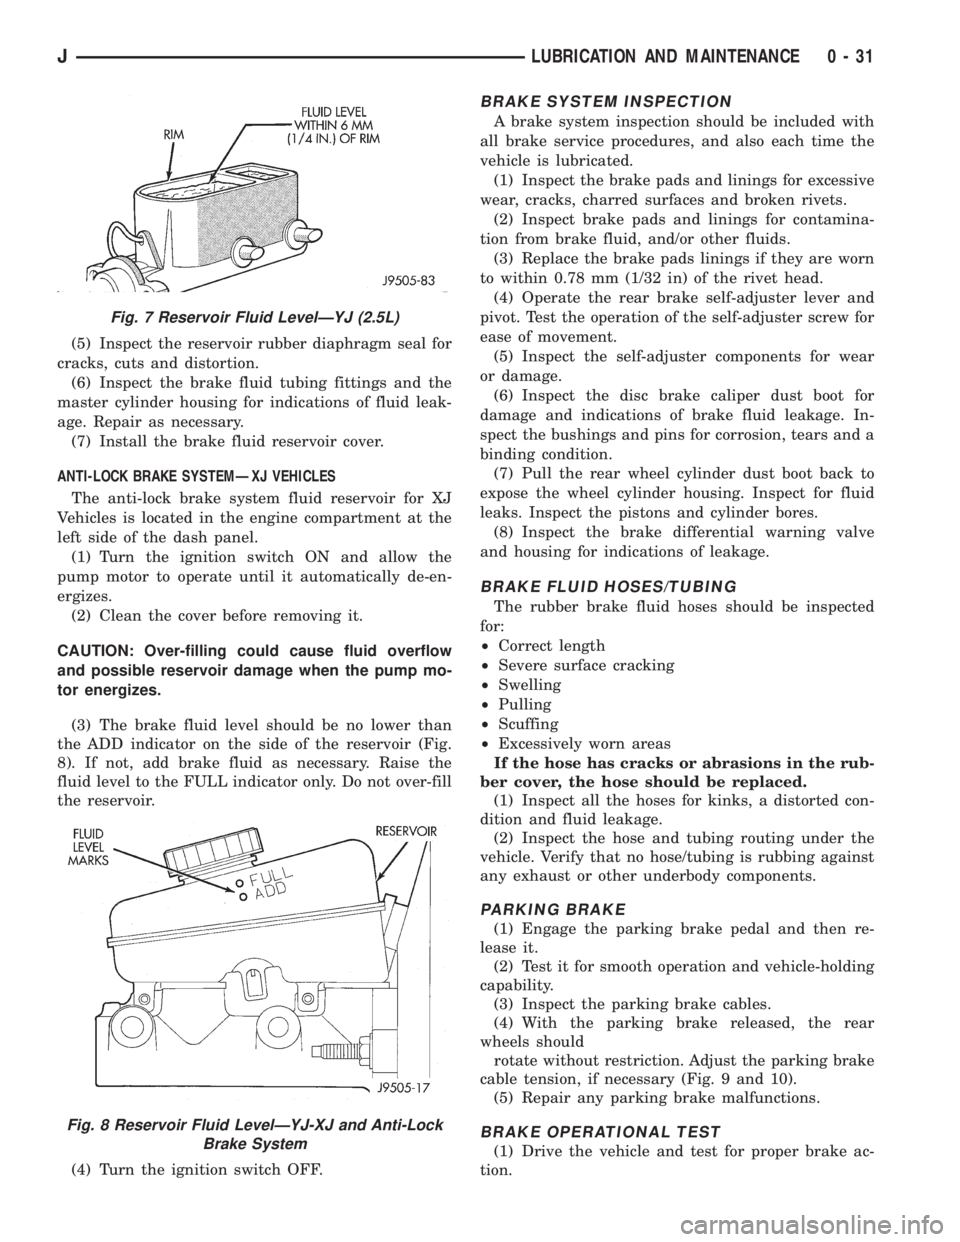 JEEP YJ 1995  Service And Repair Manual (5) Inspect the reservoir rubber diaphragm seal for
cracks, cuts and distortion.
(6) Inspect the brake fluid tubing fittings and the
master cylinder housing for indications of fluid leak-
age. Repair 